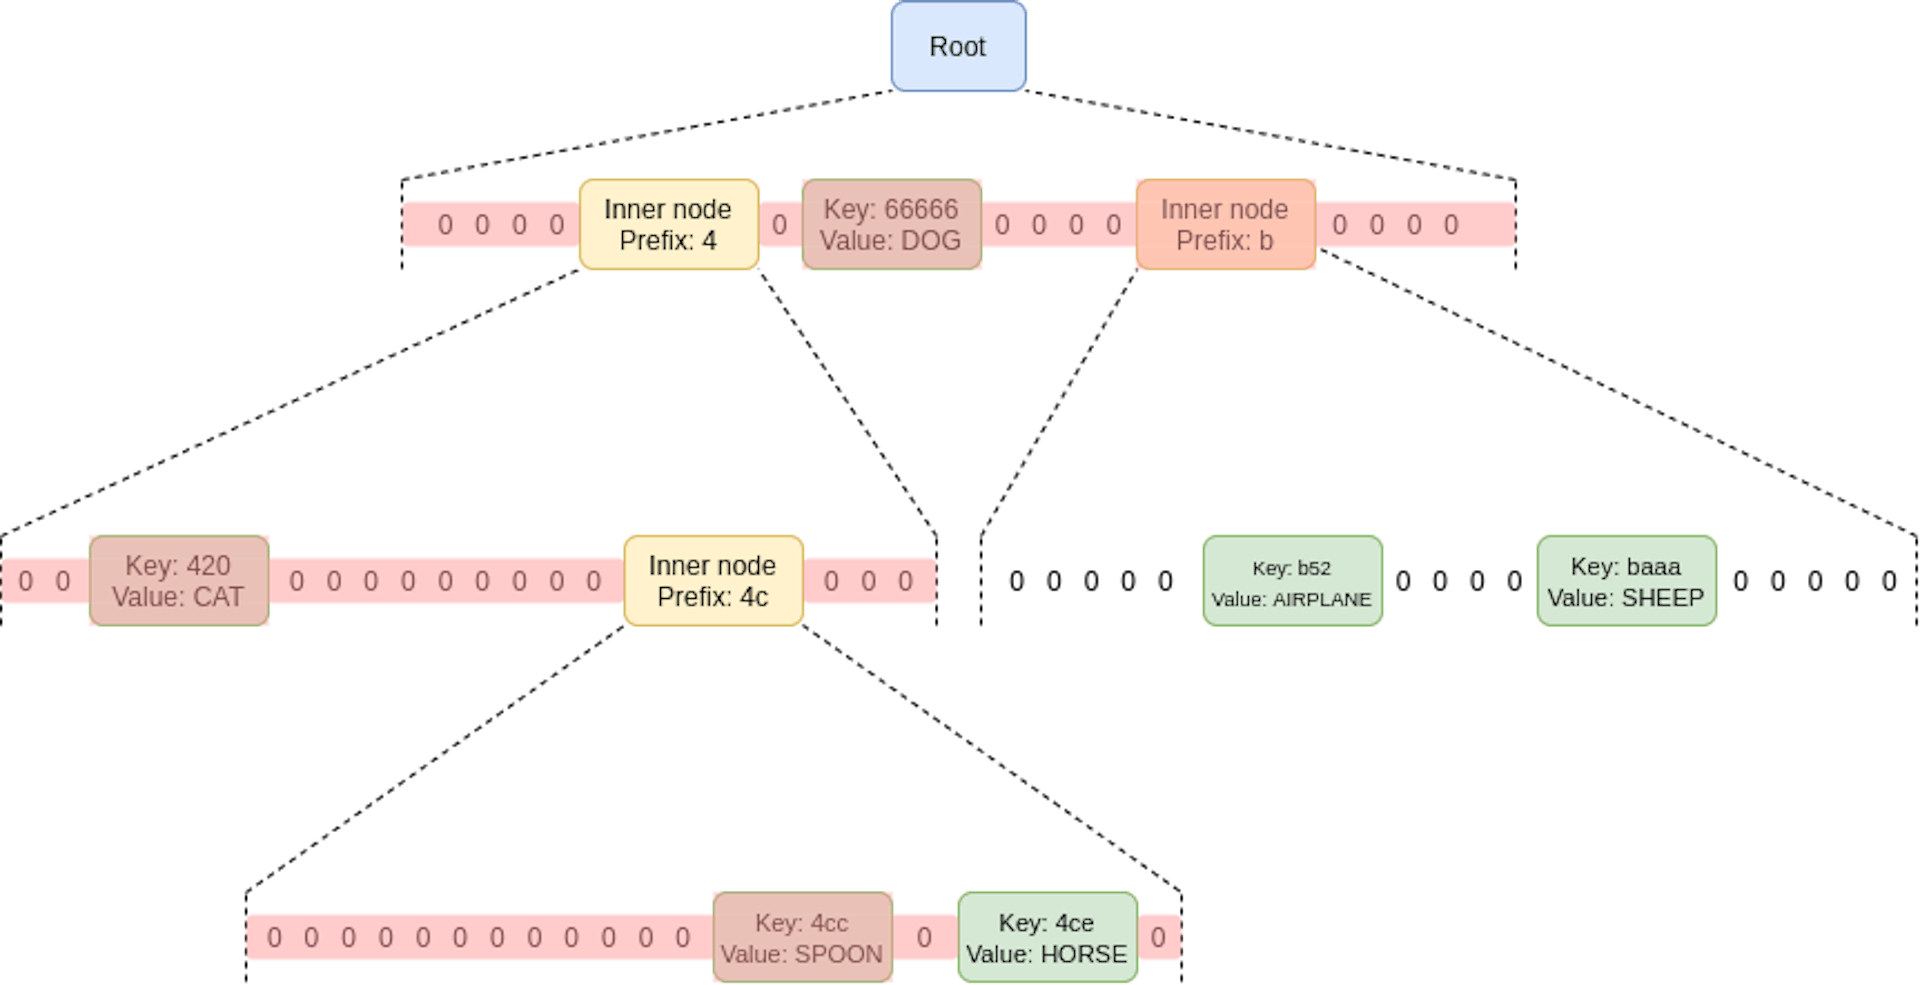 Merkle Tree containing all Sister-Nodes to provide a proof.